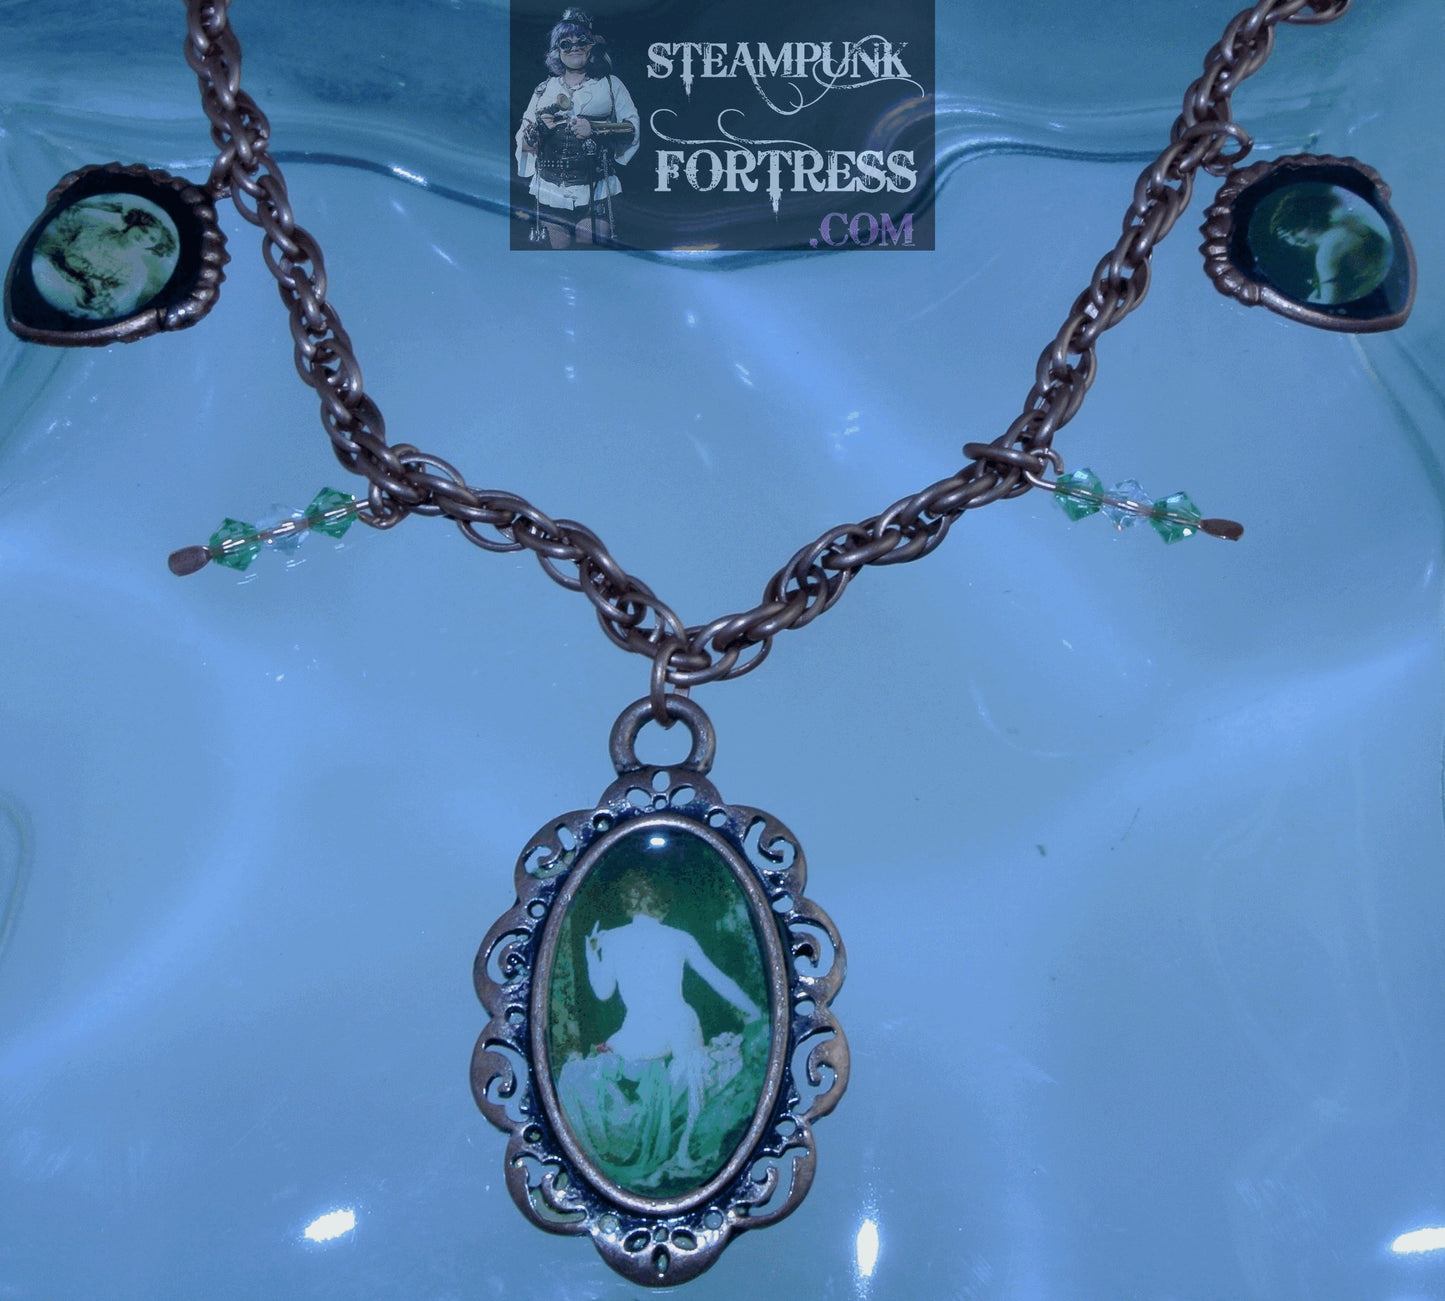 COPPER BRIGHT VINTAGE LADIES GREEN NUDE BACK LADY 2 SHIELDS GREEN SWAROVSKI CRYSTALS FANCY NECKLACE SET AVAILABLE STARR WILDE STEAMPUNK FORTRESS